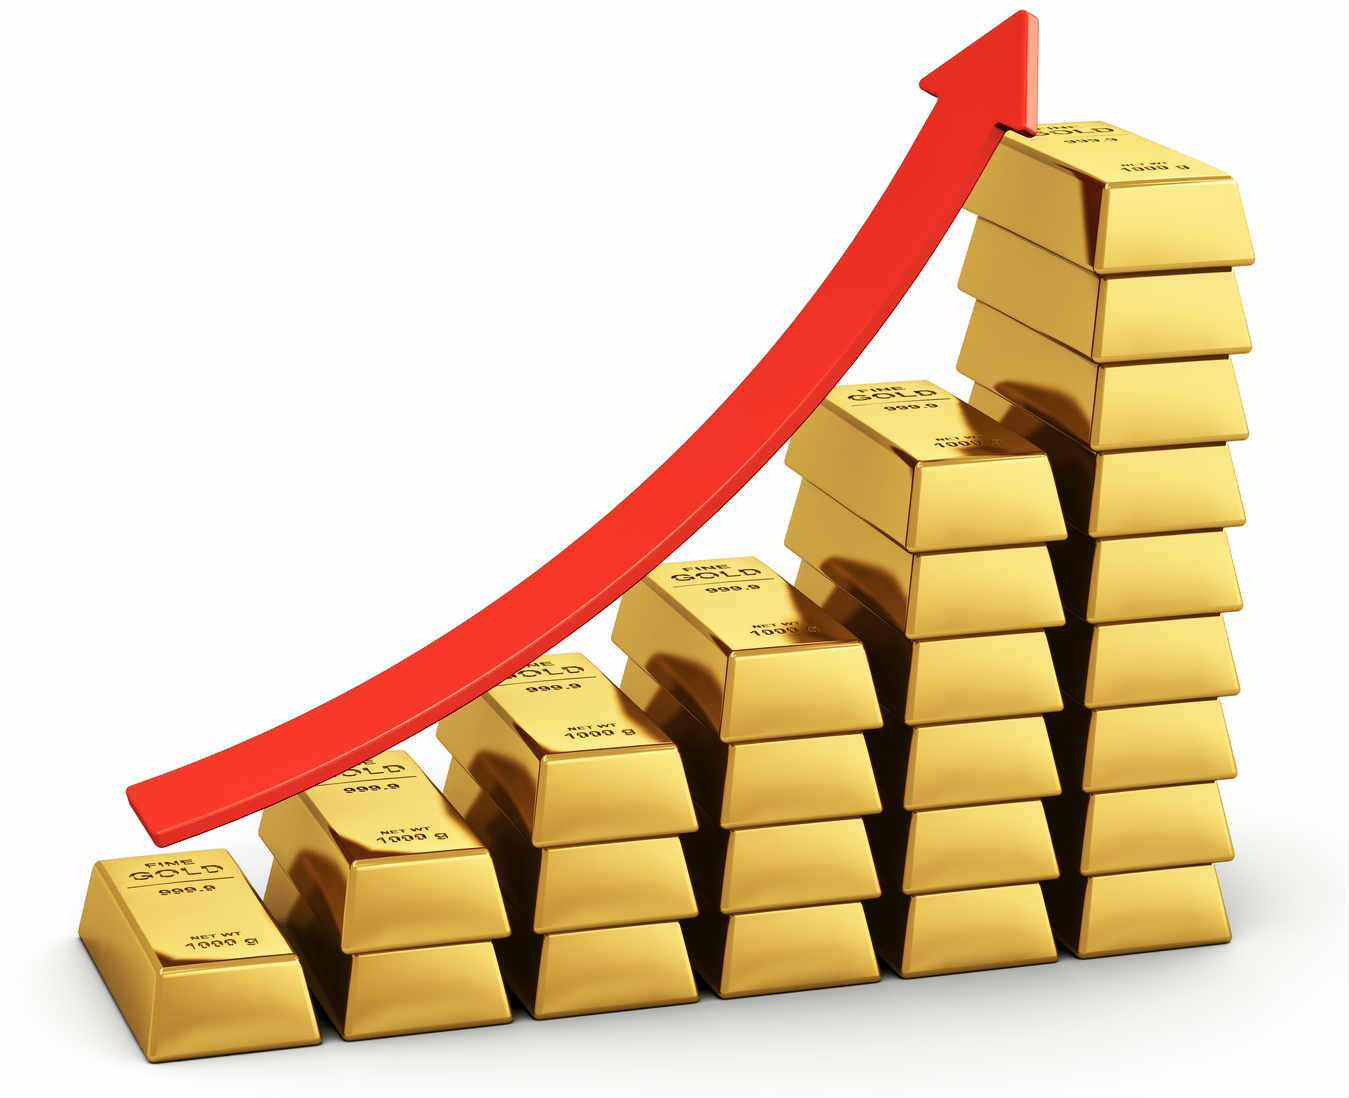 Gold price touches highest level ever of Rs 121,600 per tola today